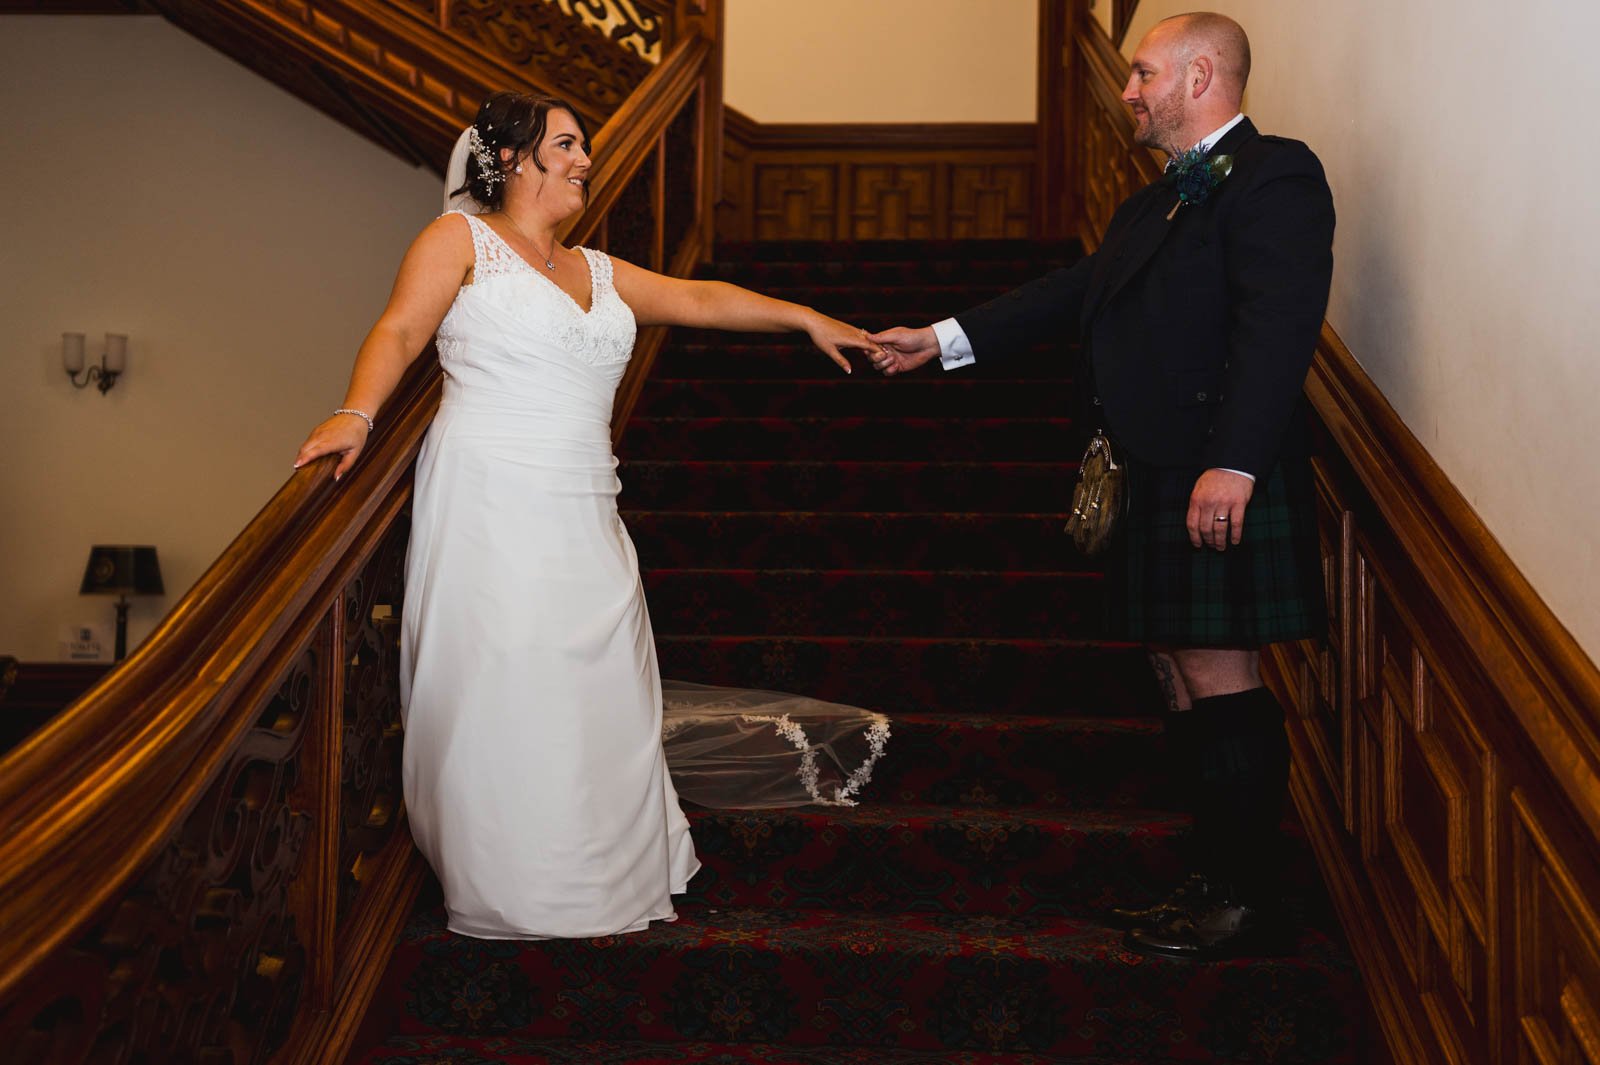  bride and groom on stairs inside 